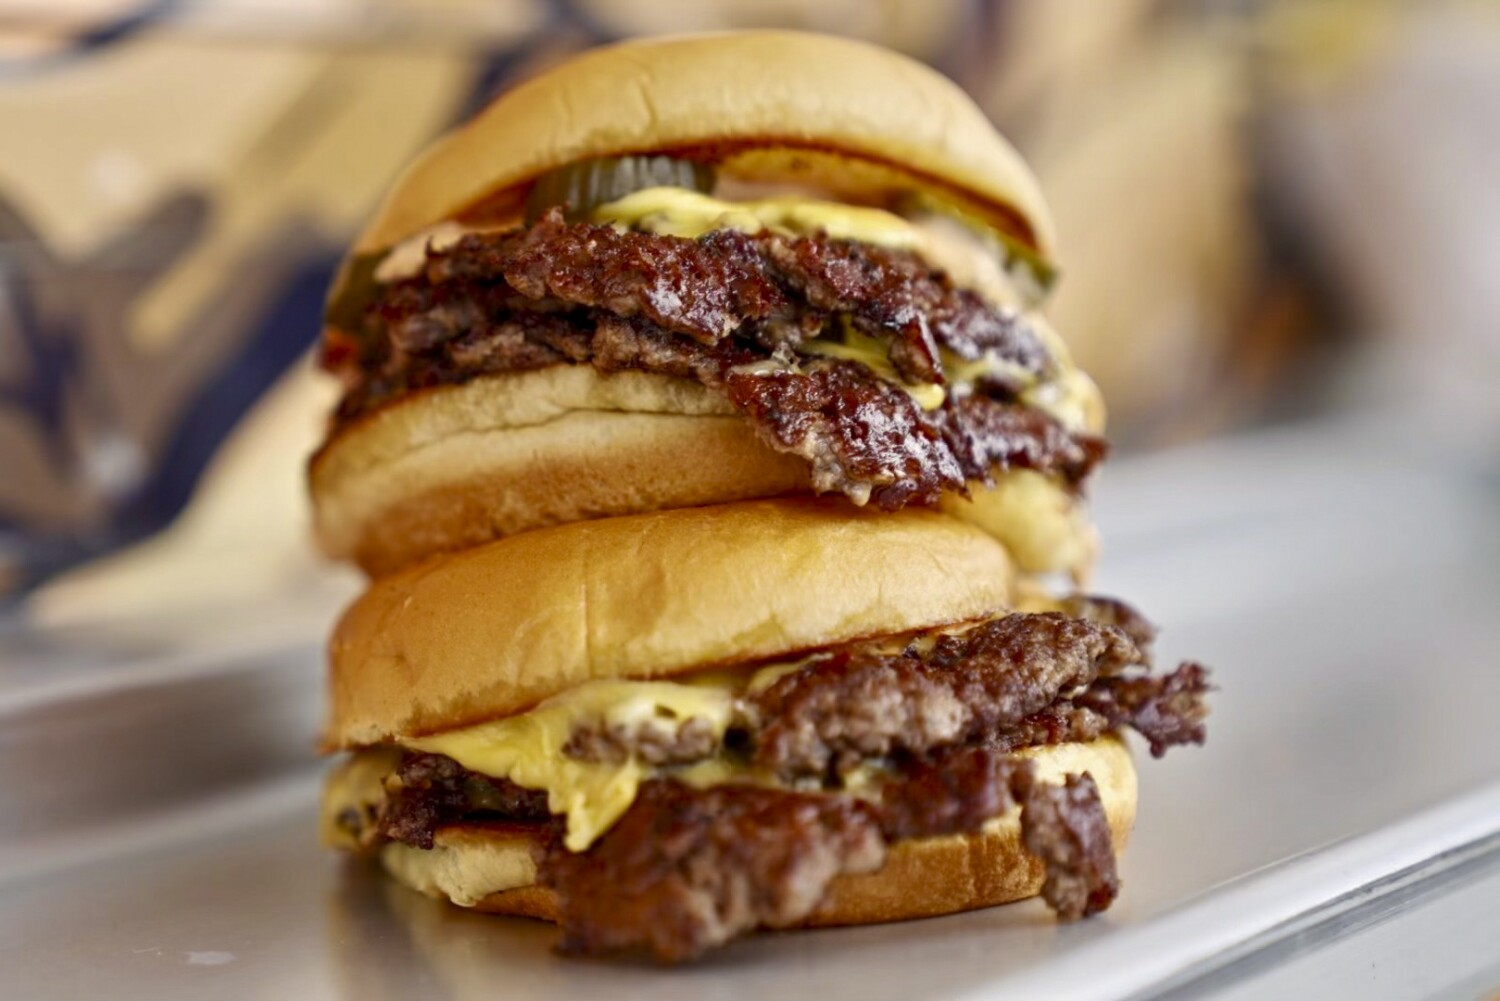 Wildly popular smashburger pop-up Heavy Handed to launch first restaurant